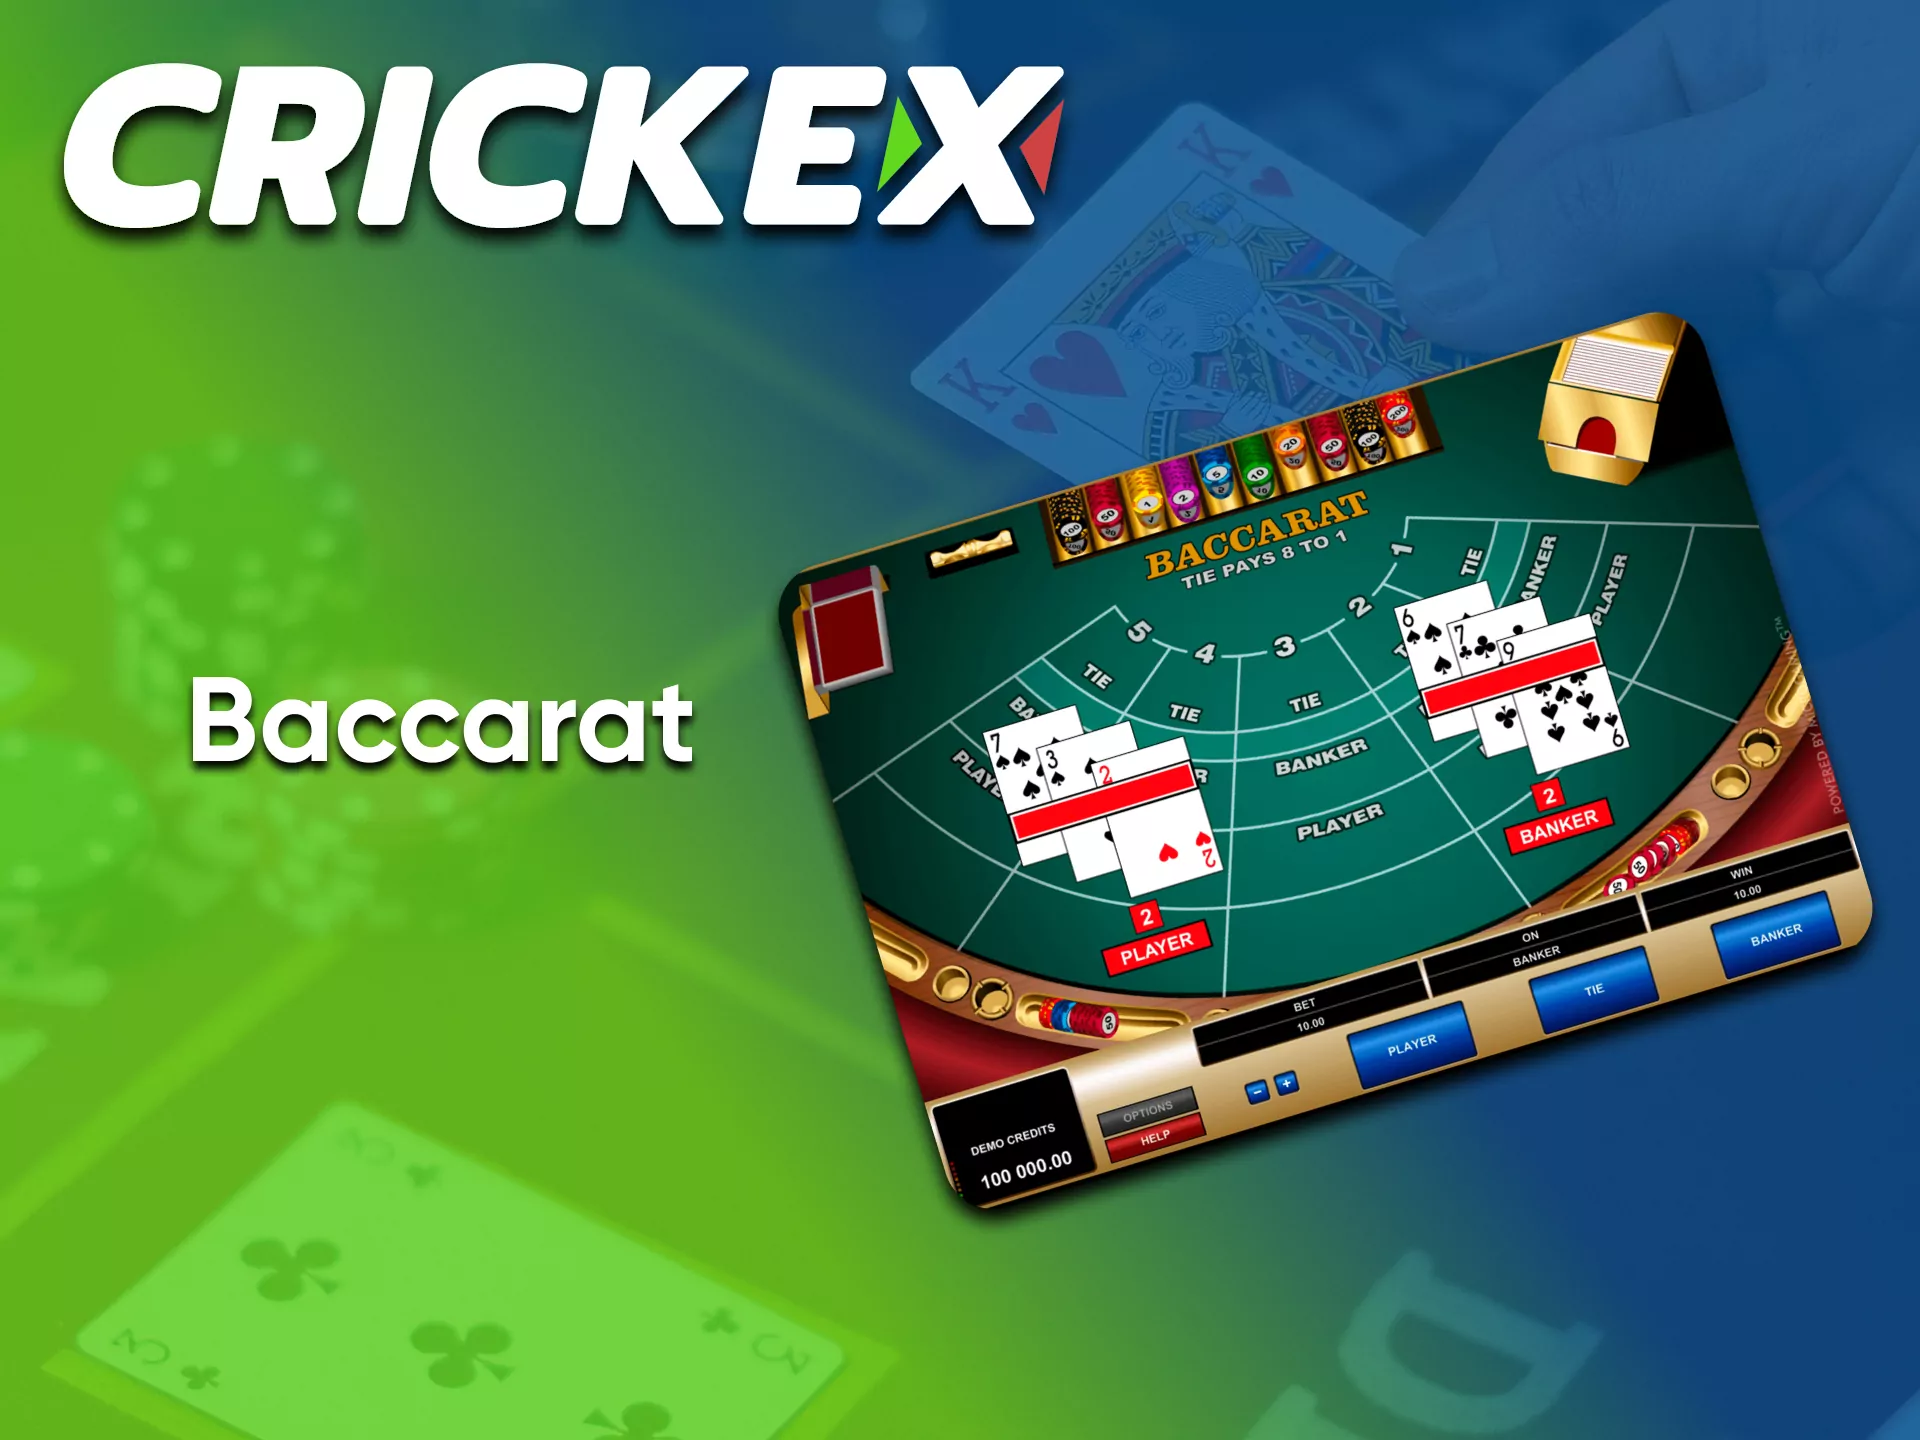 Use the Crickex casino to play Online Baccarat.